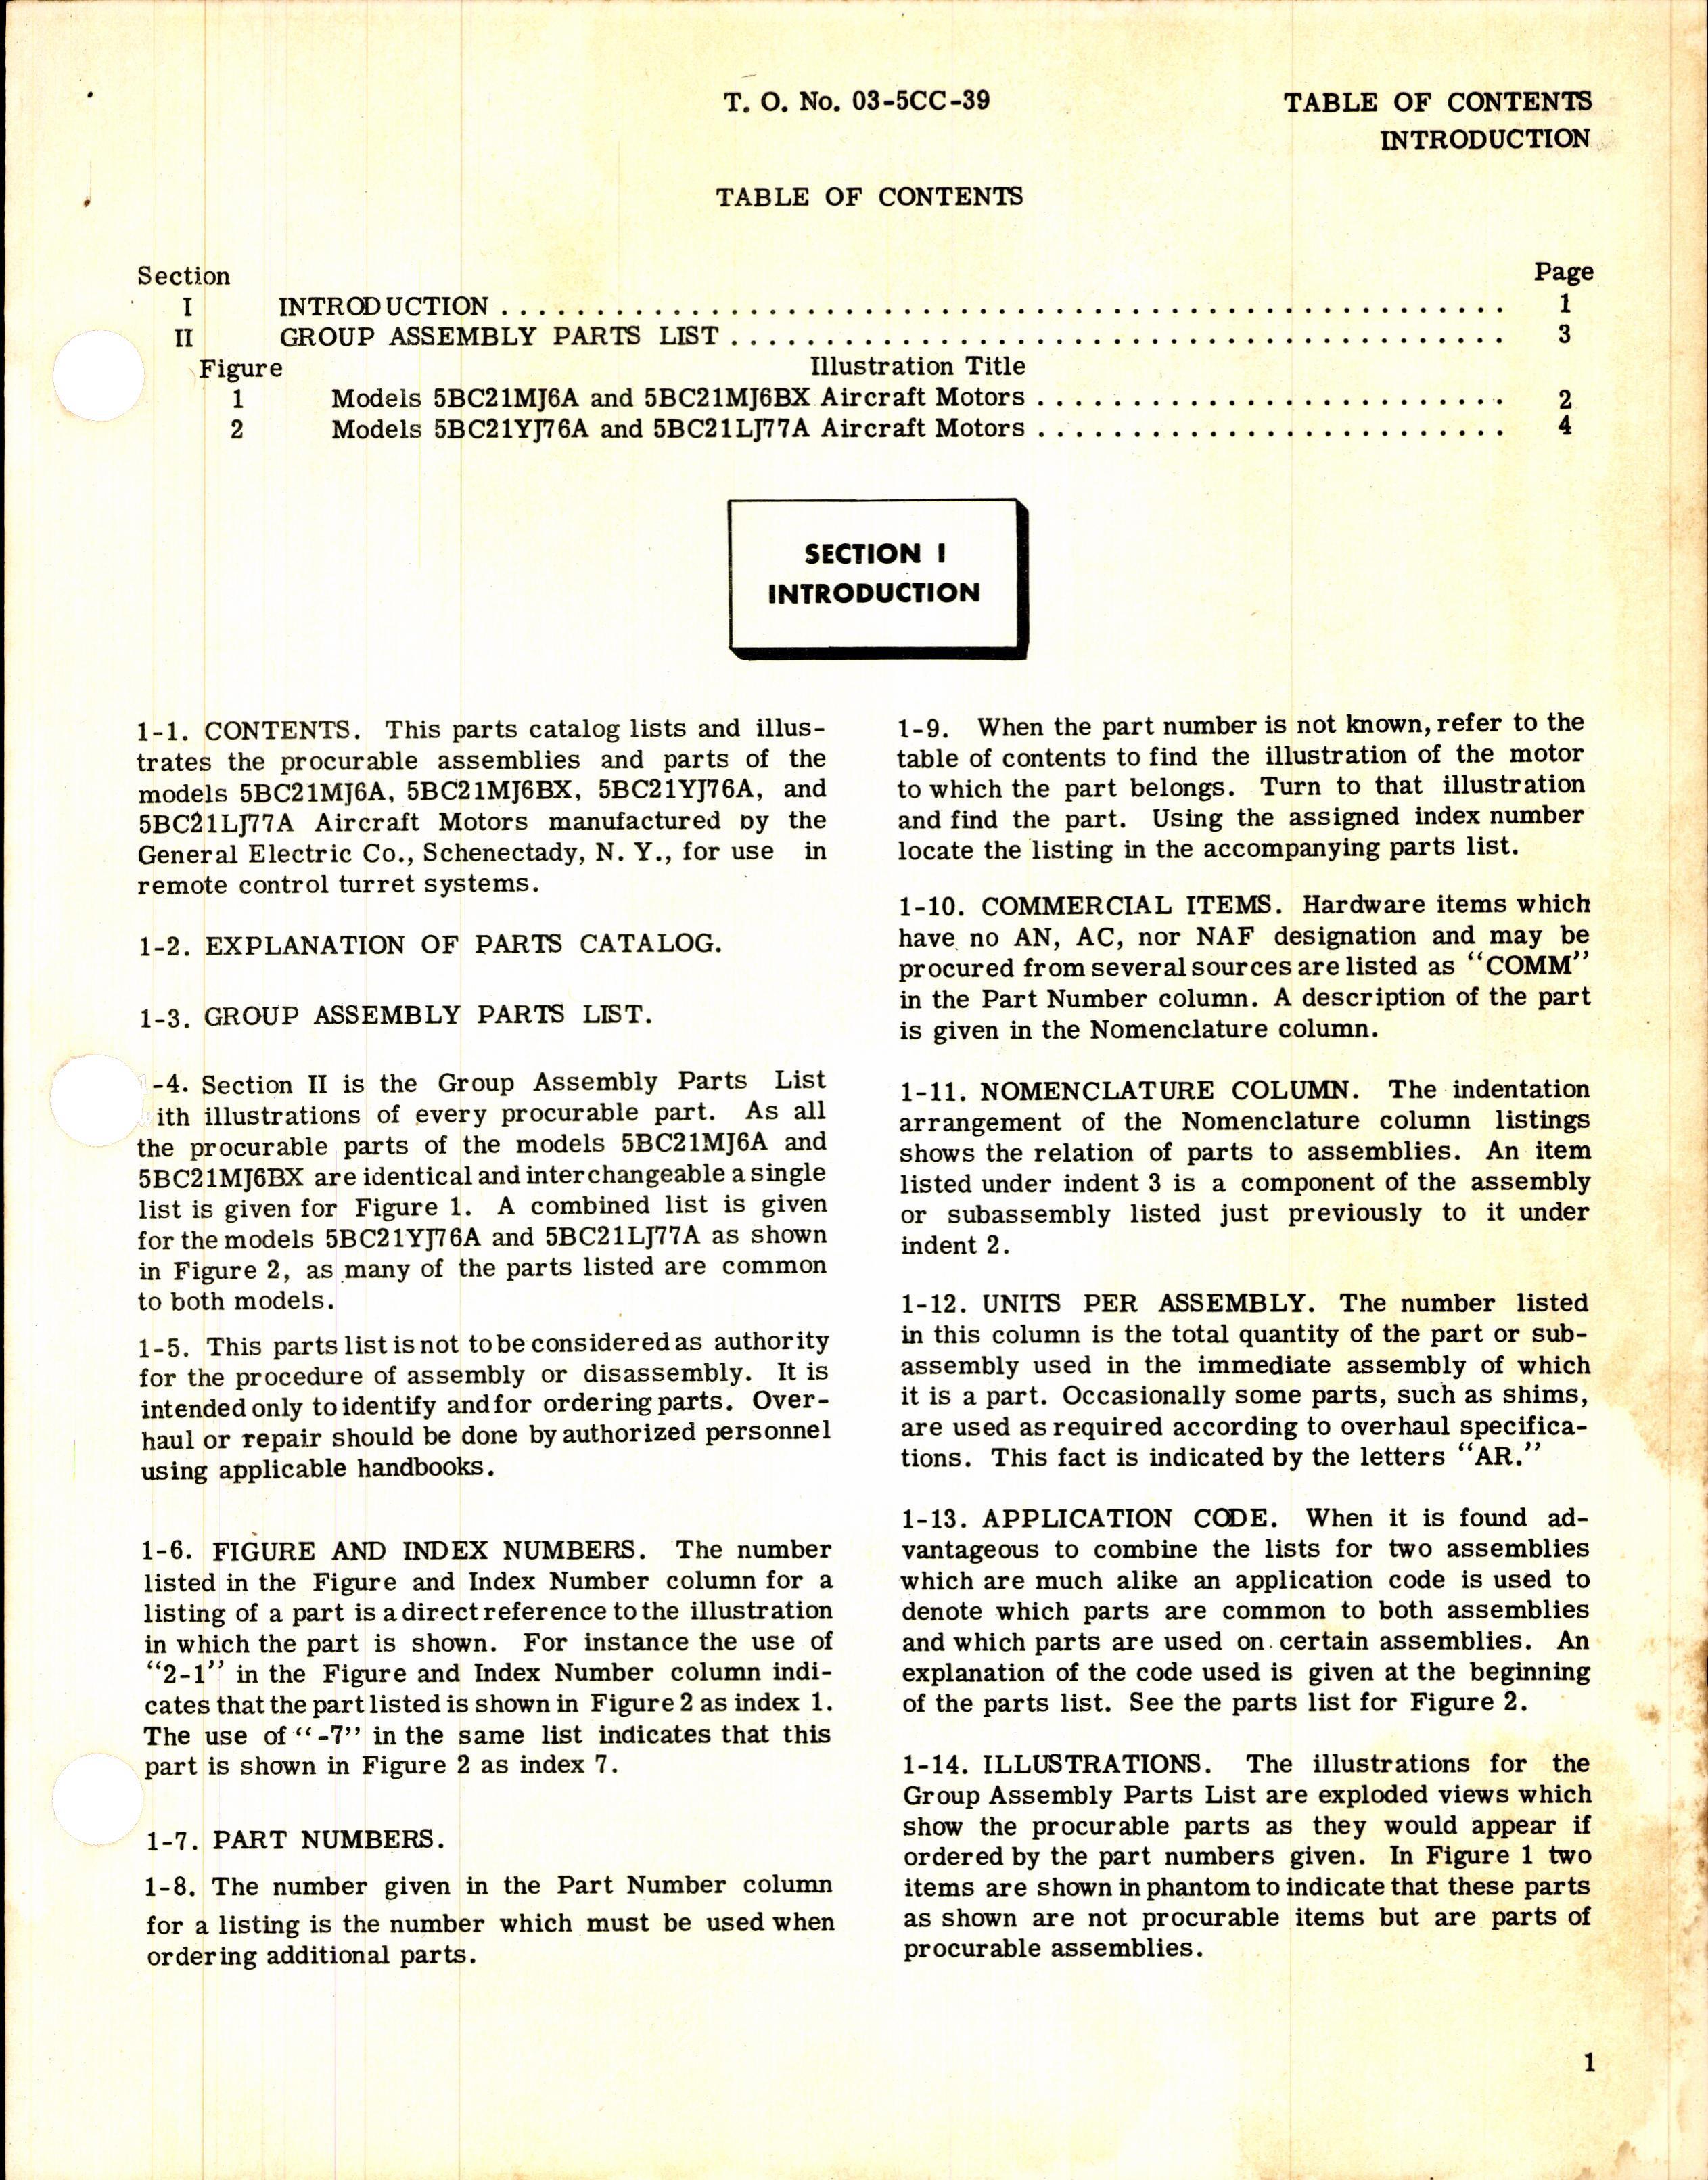 Sample page 3 from AirCorps Library document: Parts Catalog for General Electric Series 5BC21 Aircraft Motor